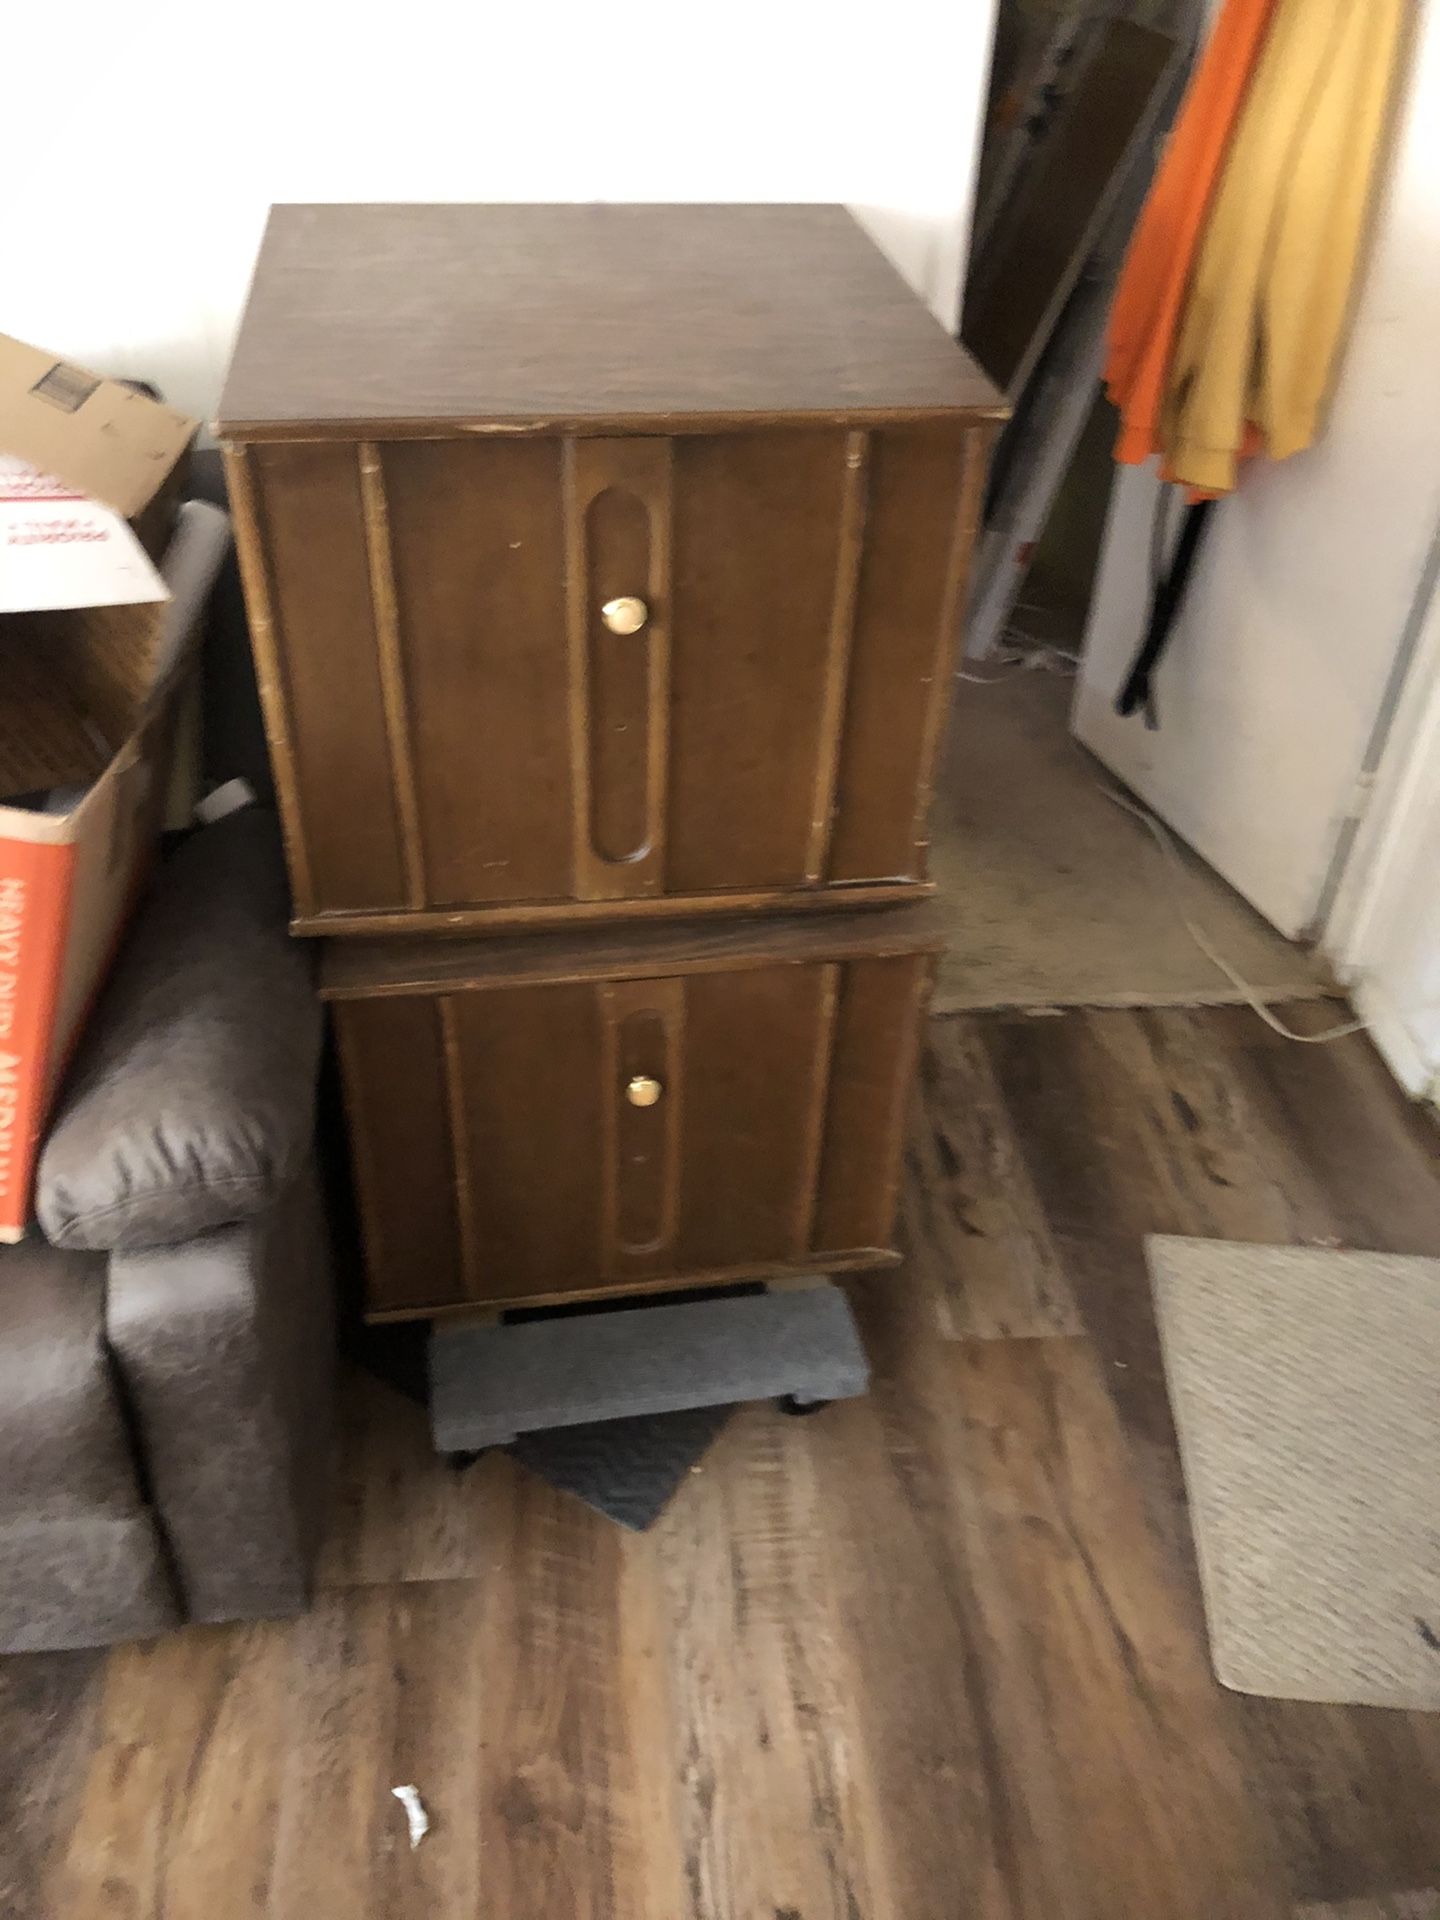 Curb alert, free Matching end/side tables with internal shelf....5484 n 43rd ave, near entrance/exit circle